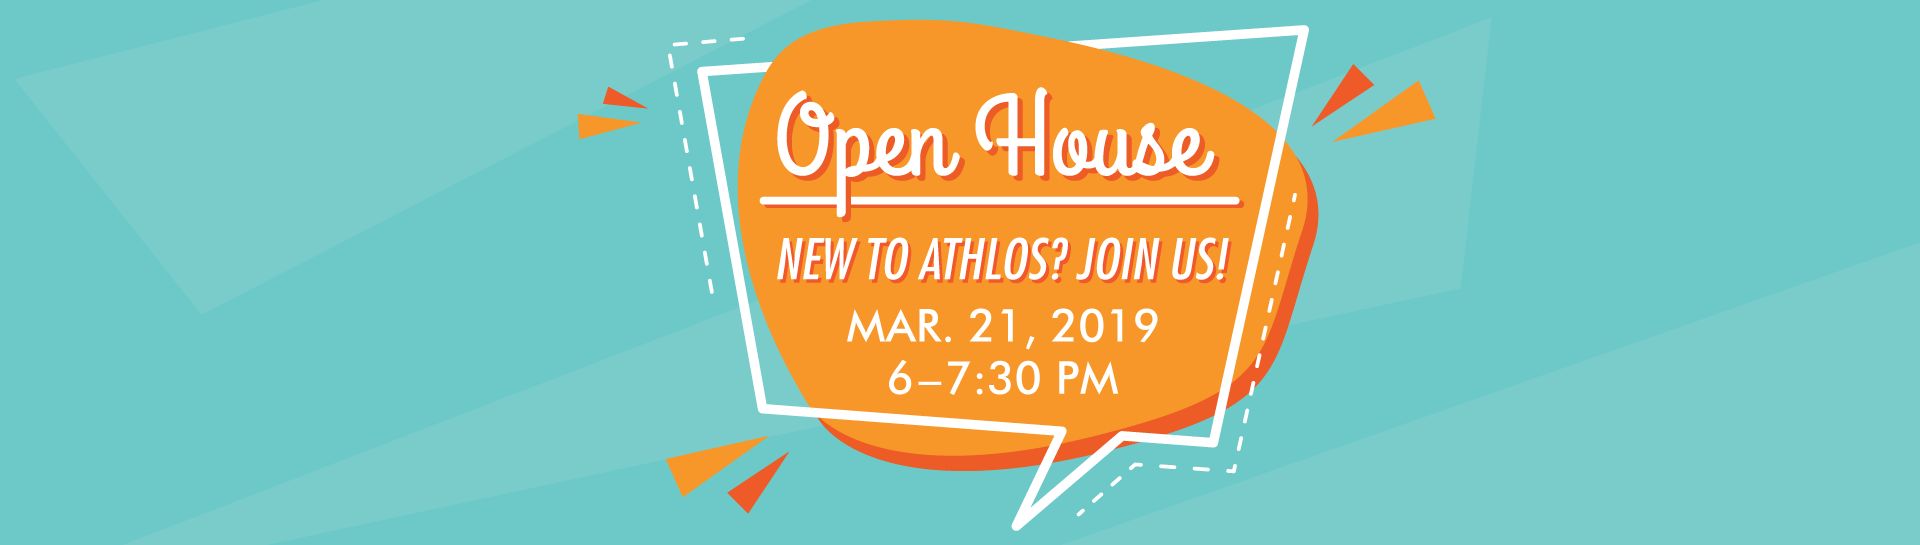 Join us for an open house on March 21, 2019 at 6:00 – 7:30 PM